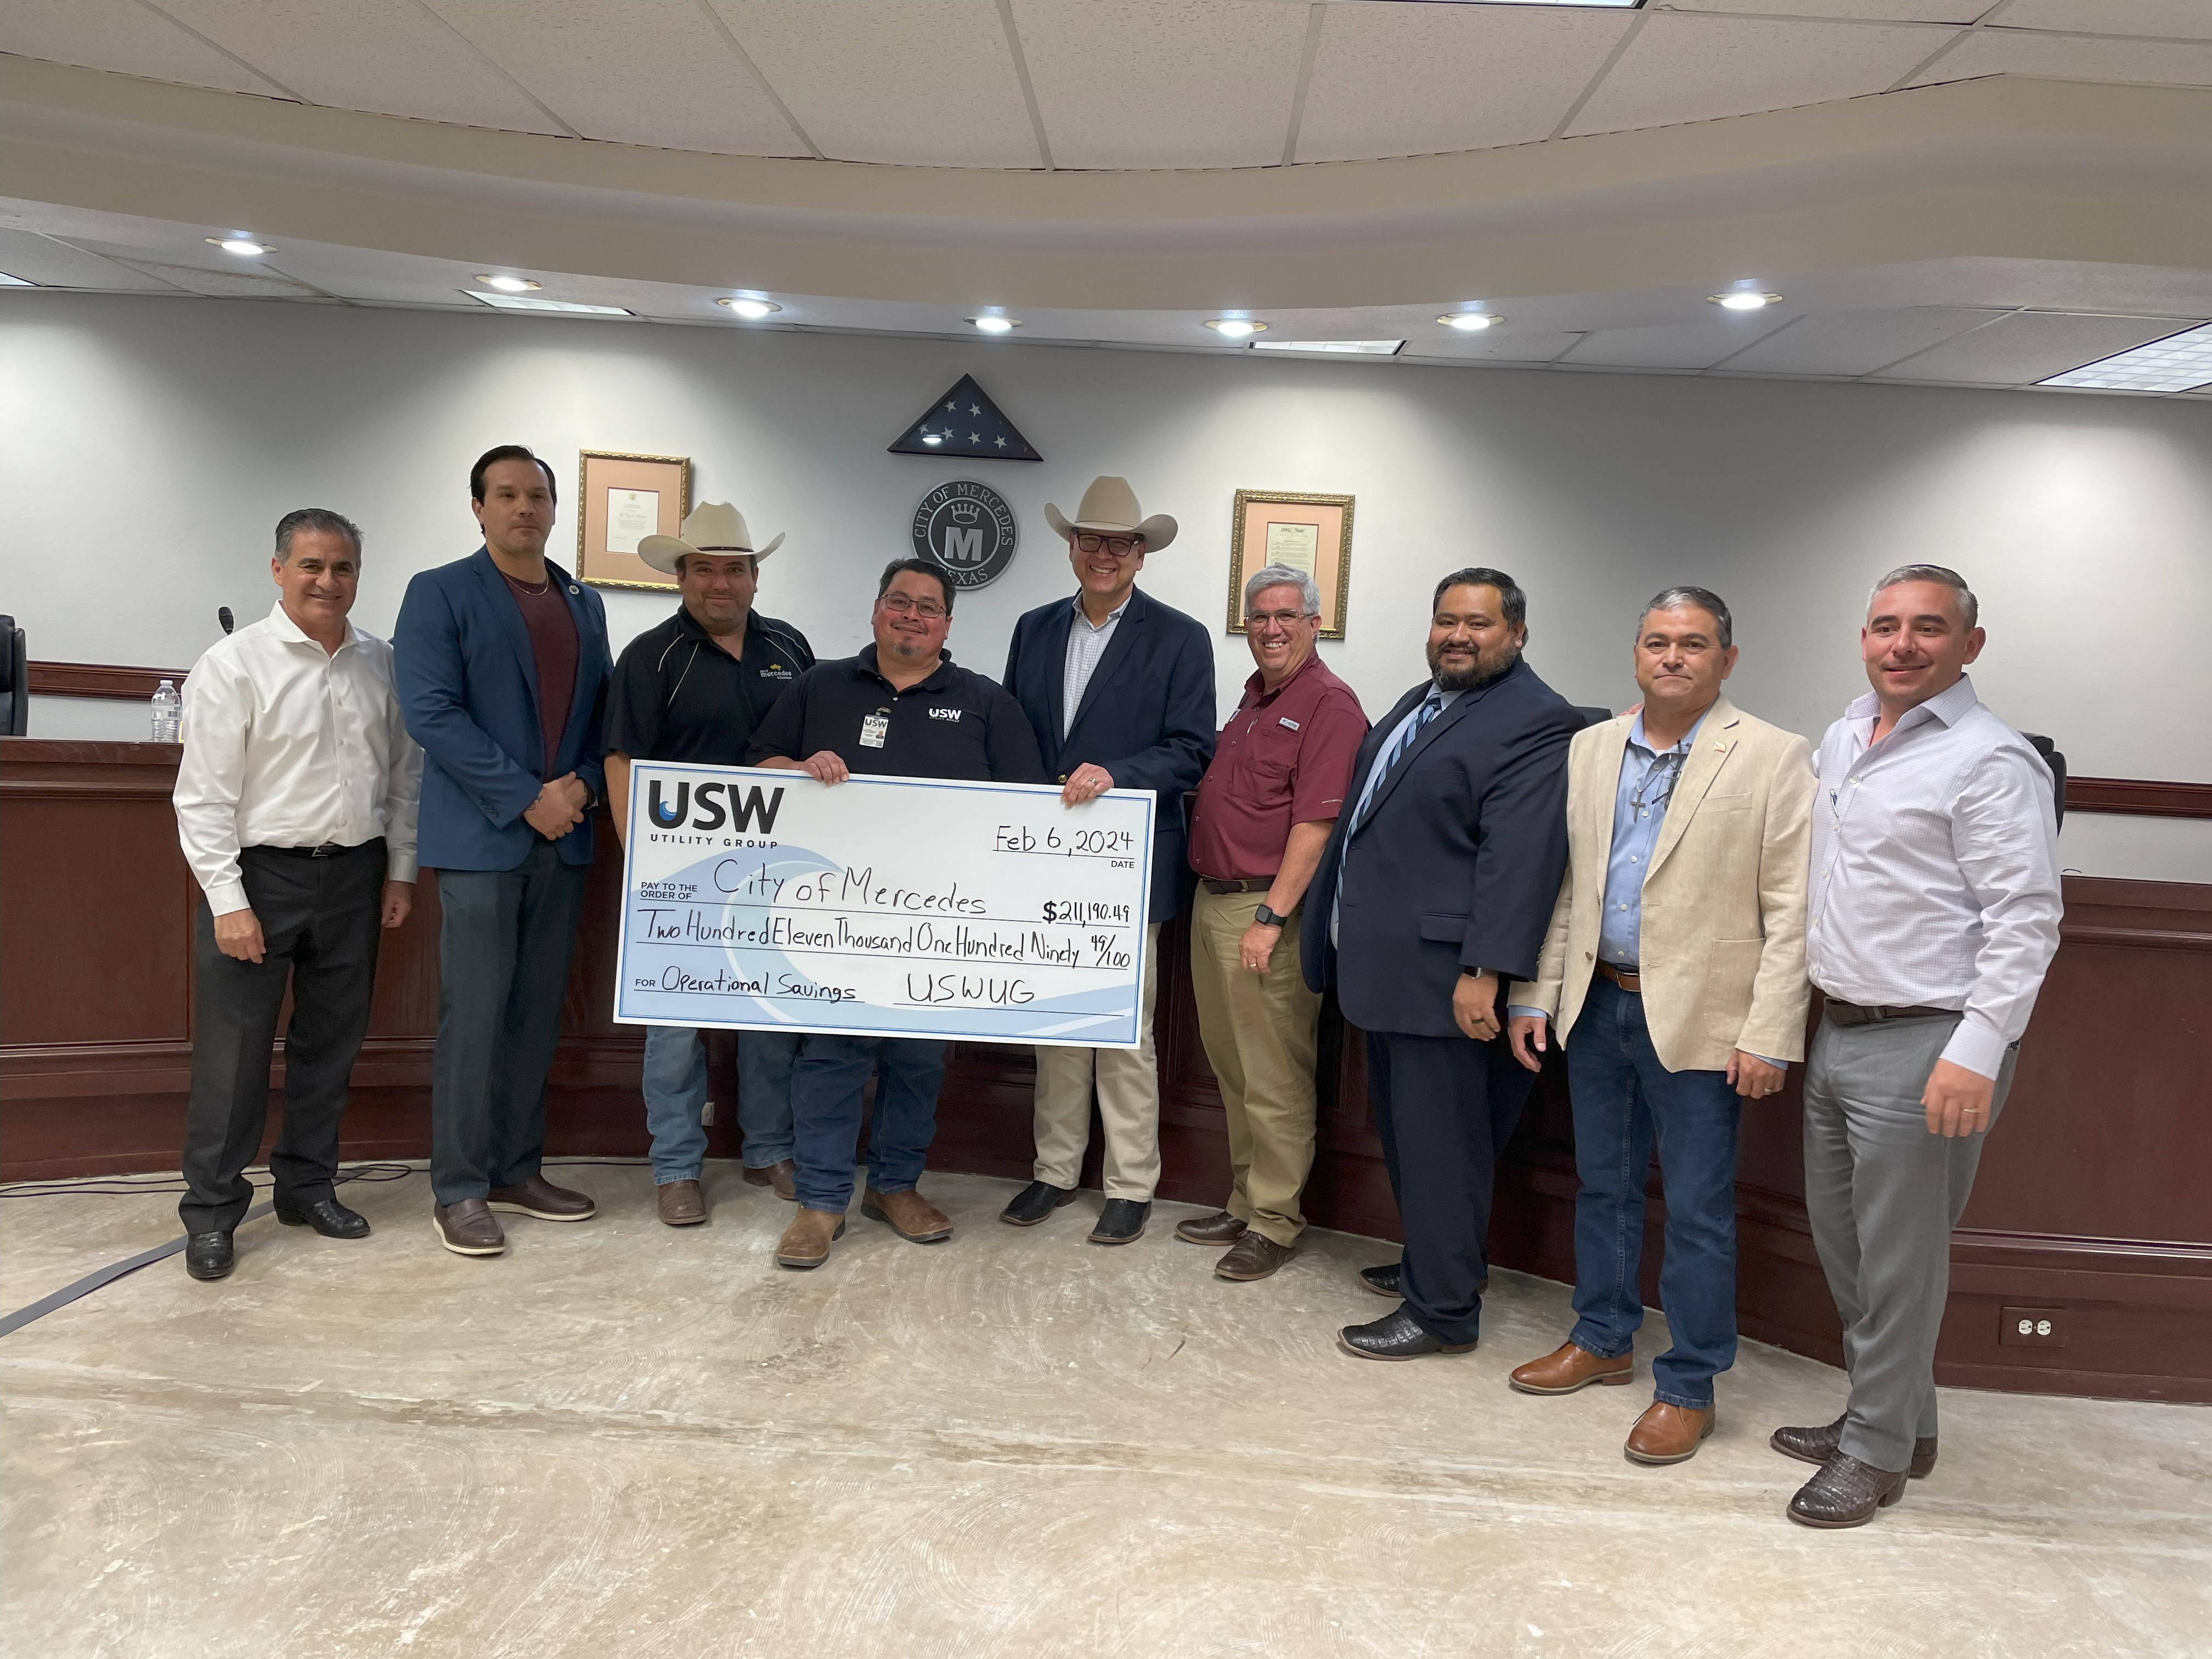 City of Mercedes check to USW Utility Group